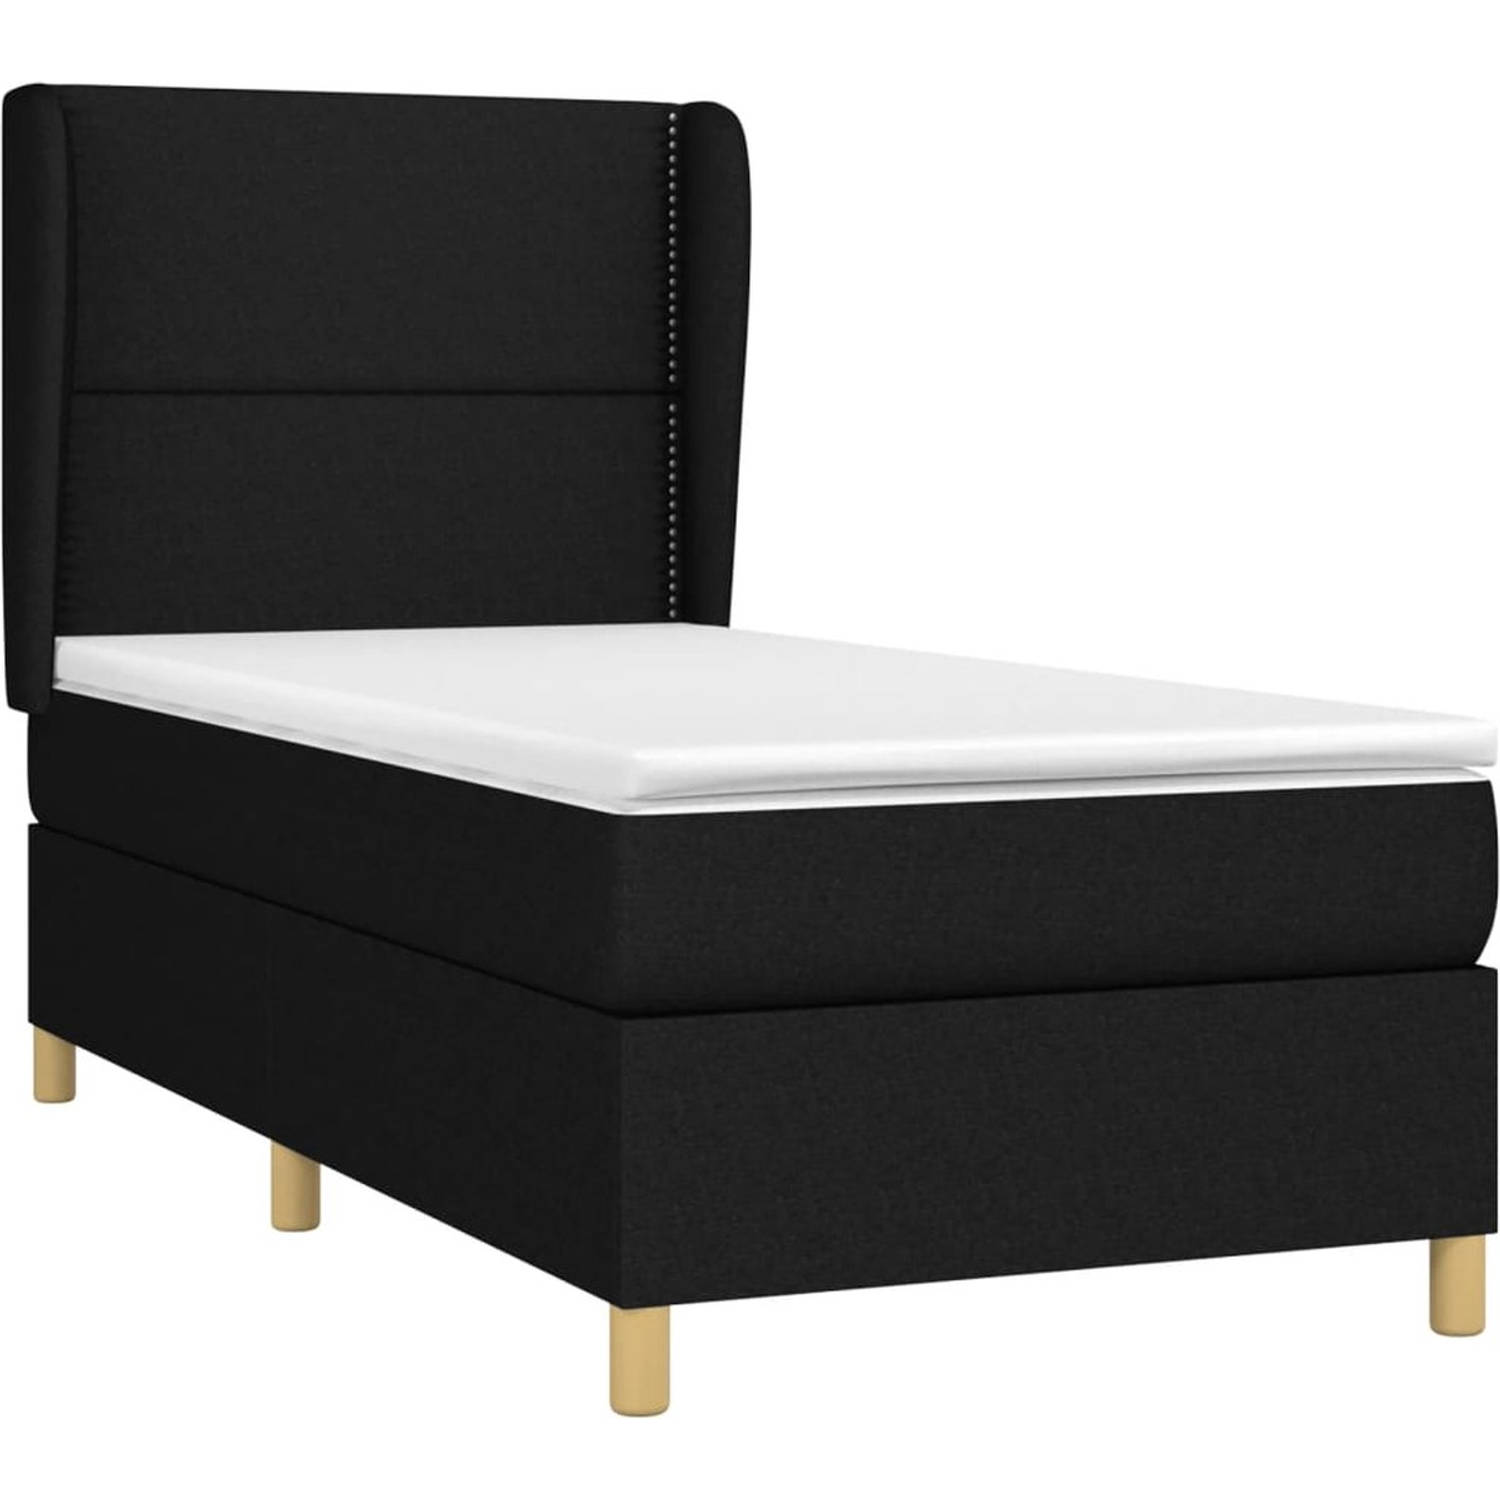 The Living Store Boxspringbed - Comfort - Bed - 203 x 83 x 118/128 cm - Zwart